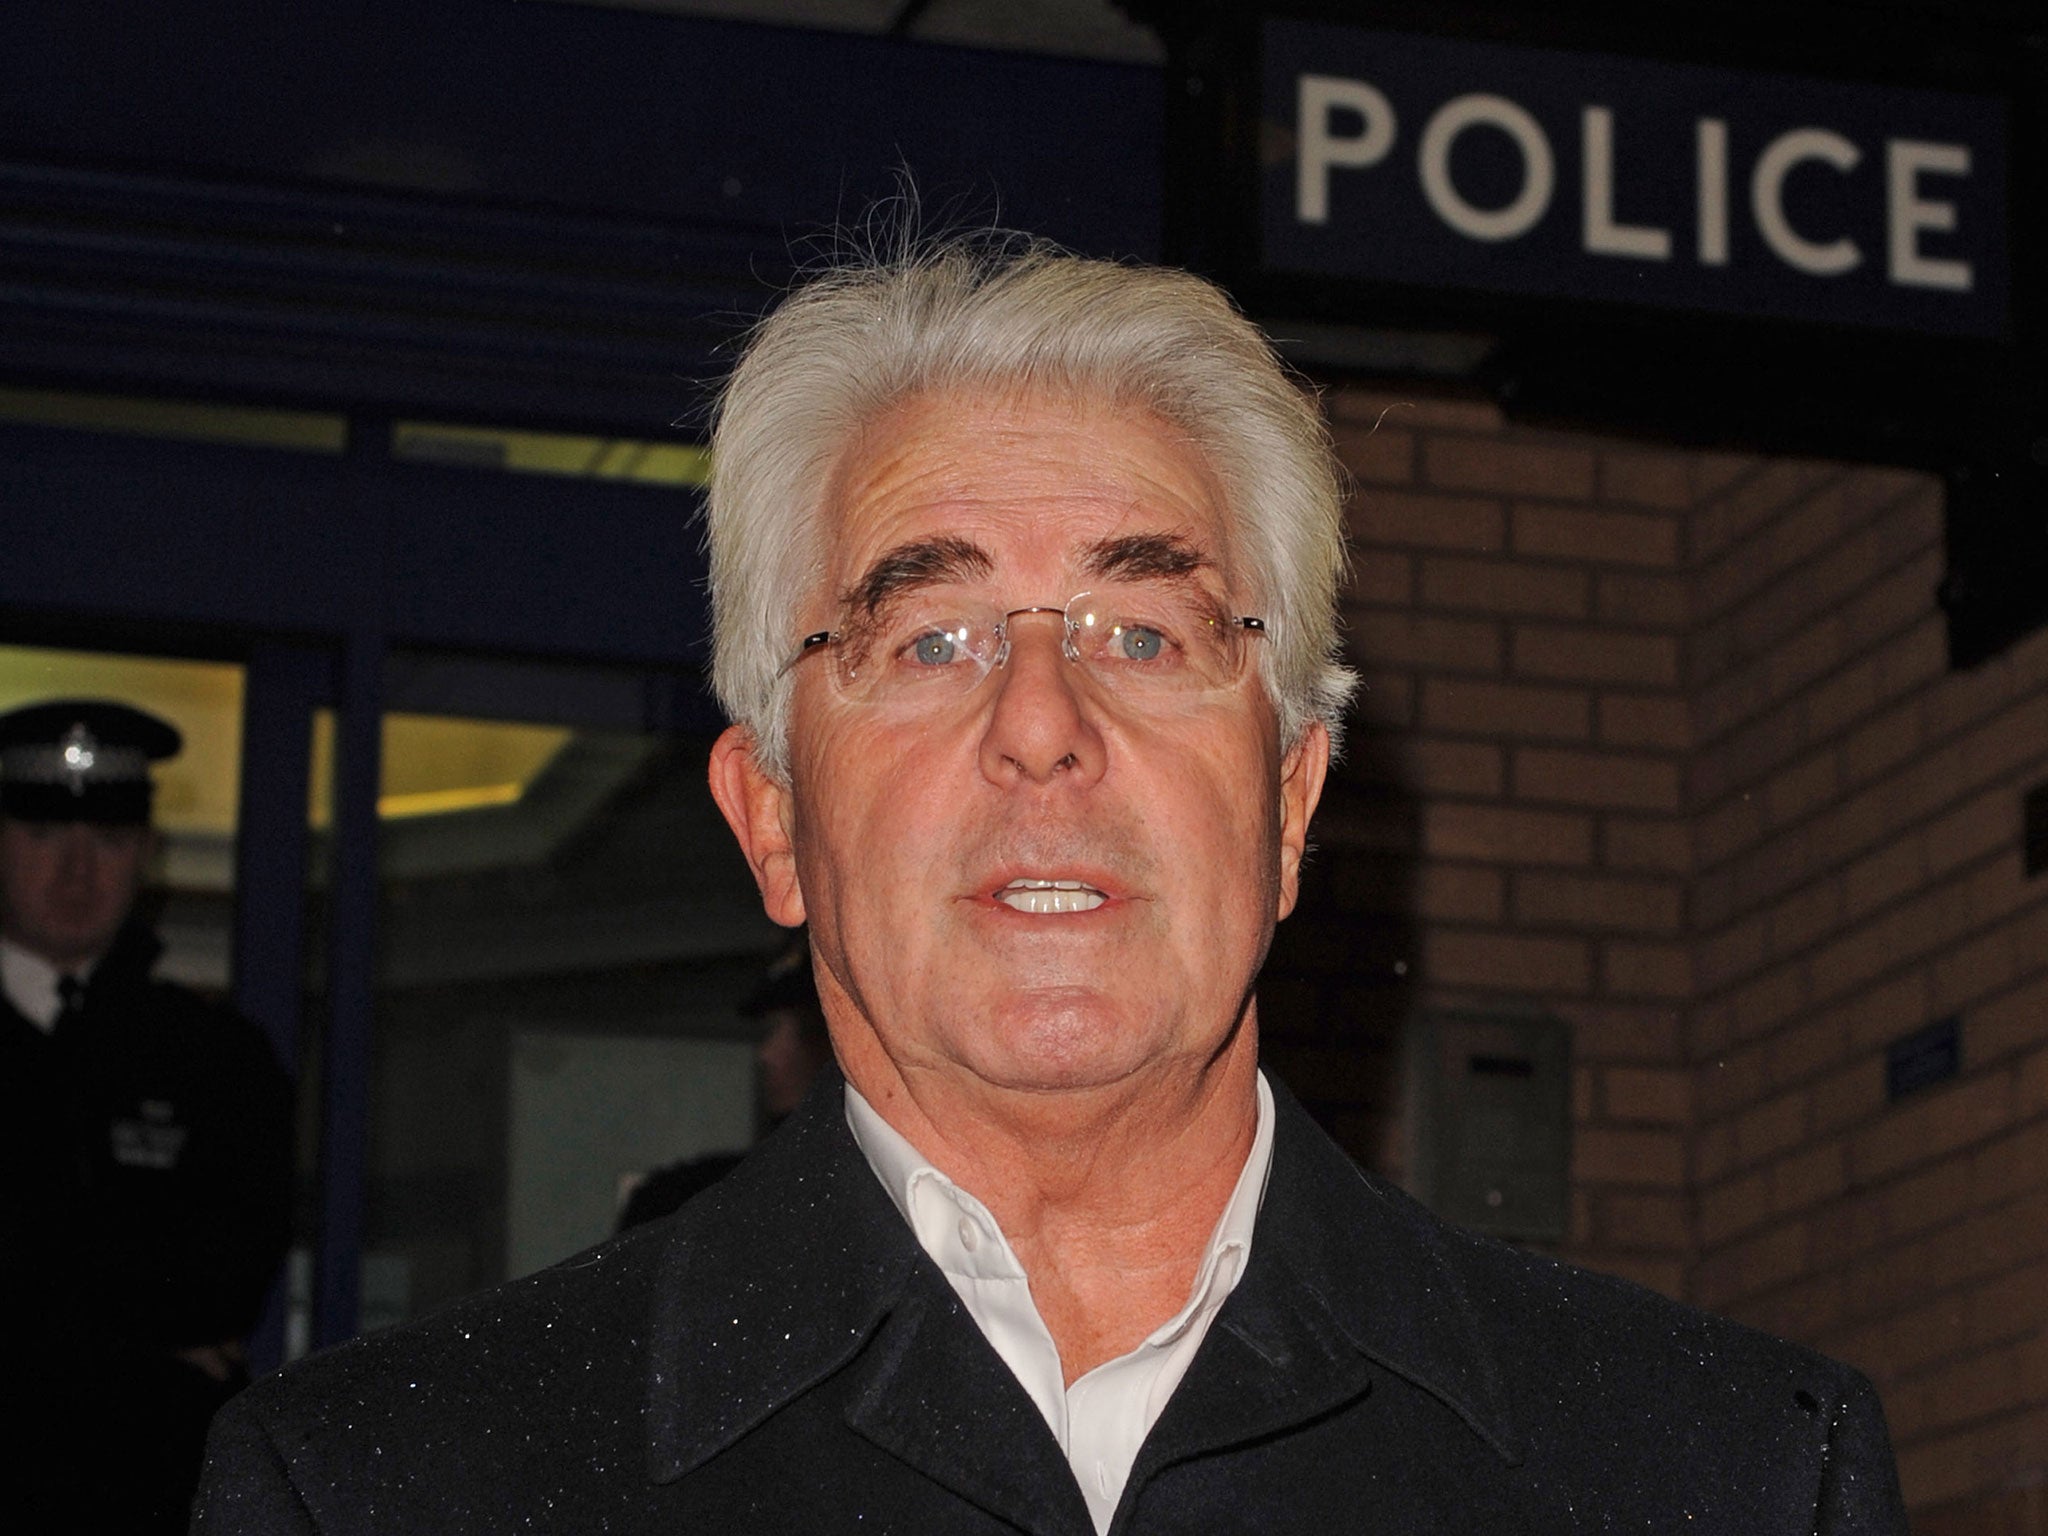 Max Clifford is accused of 11 counts of indecent assault